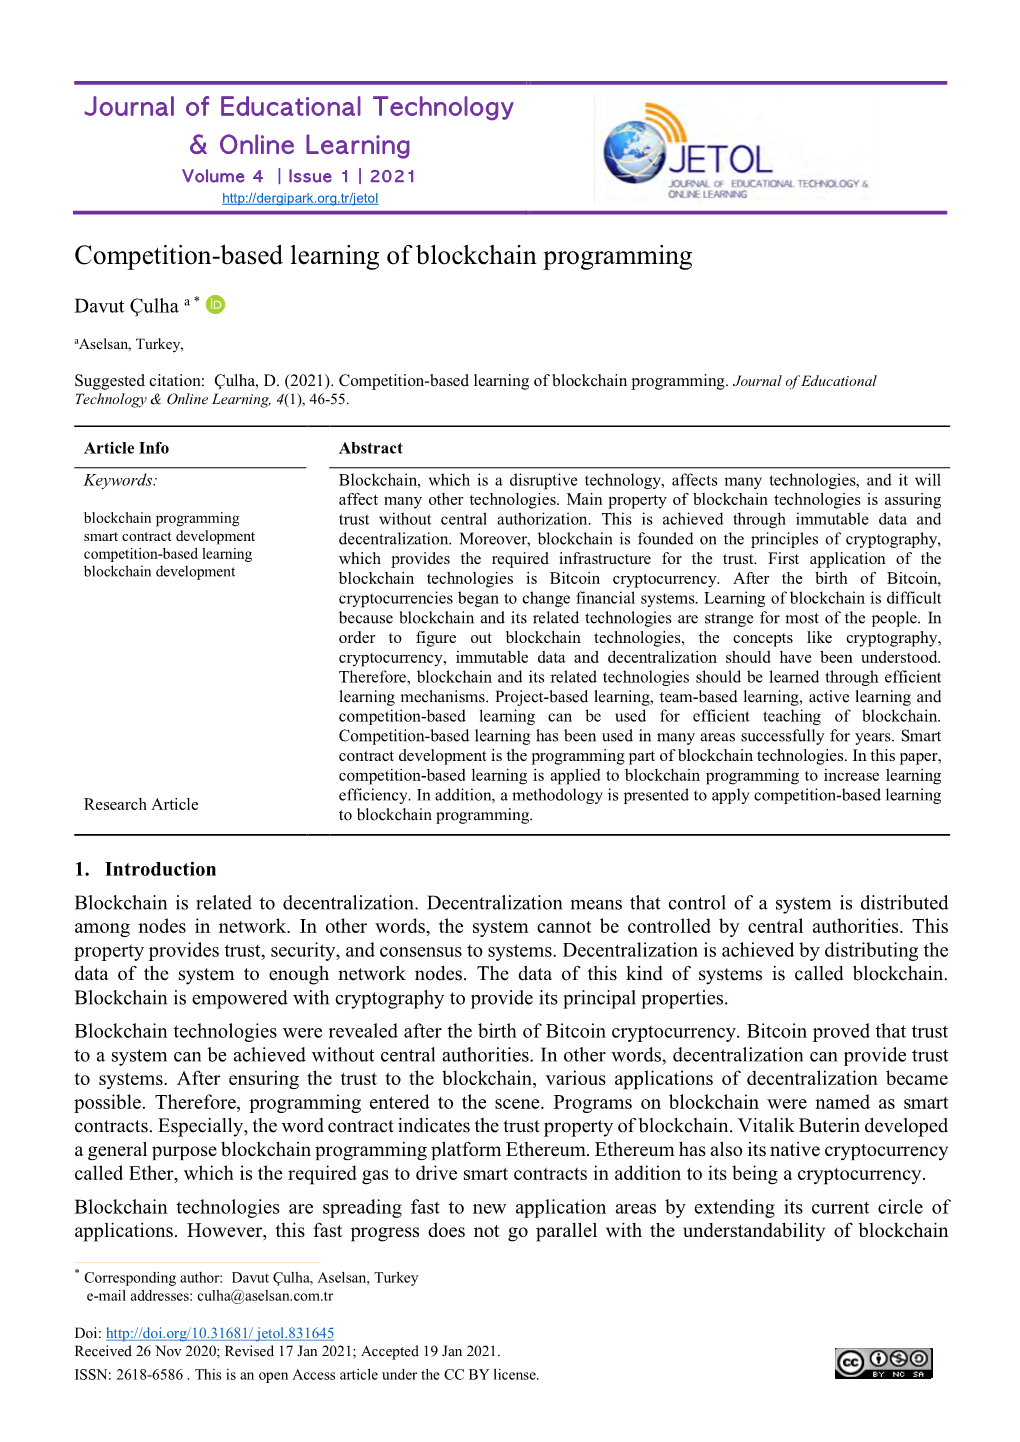 Competition-Based Learning of Blockchain Programming